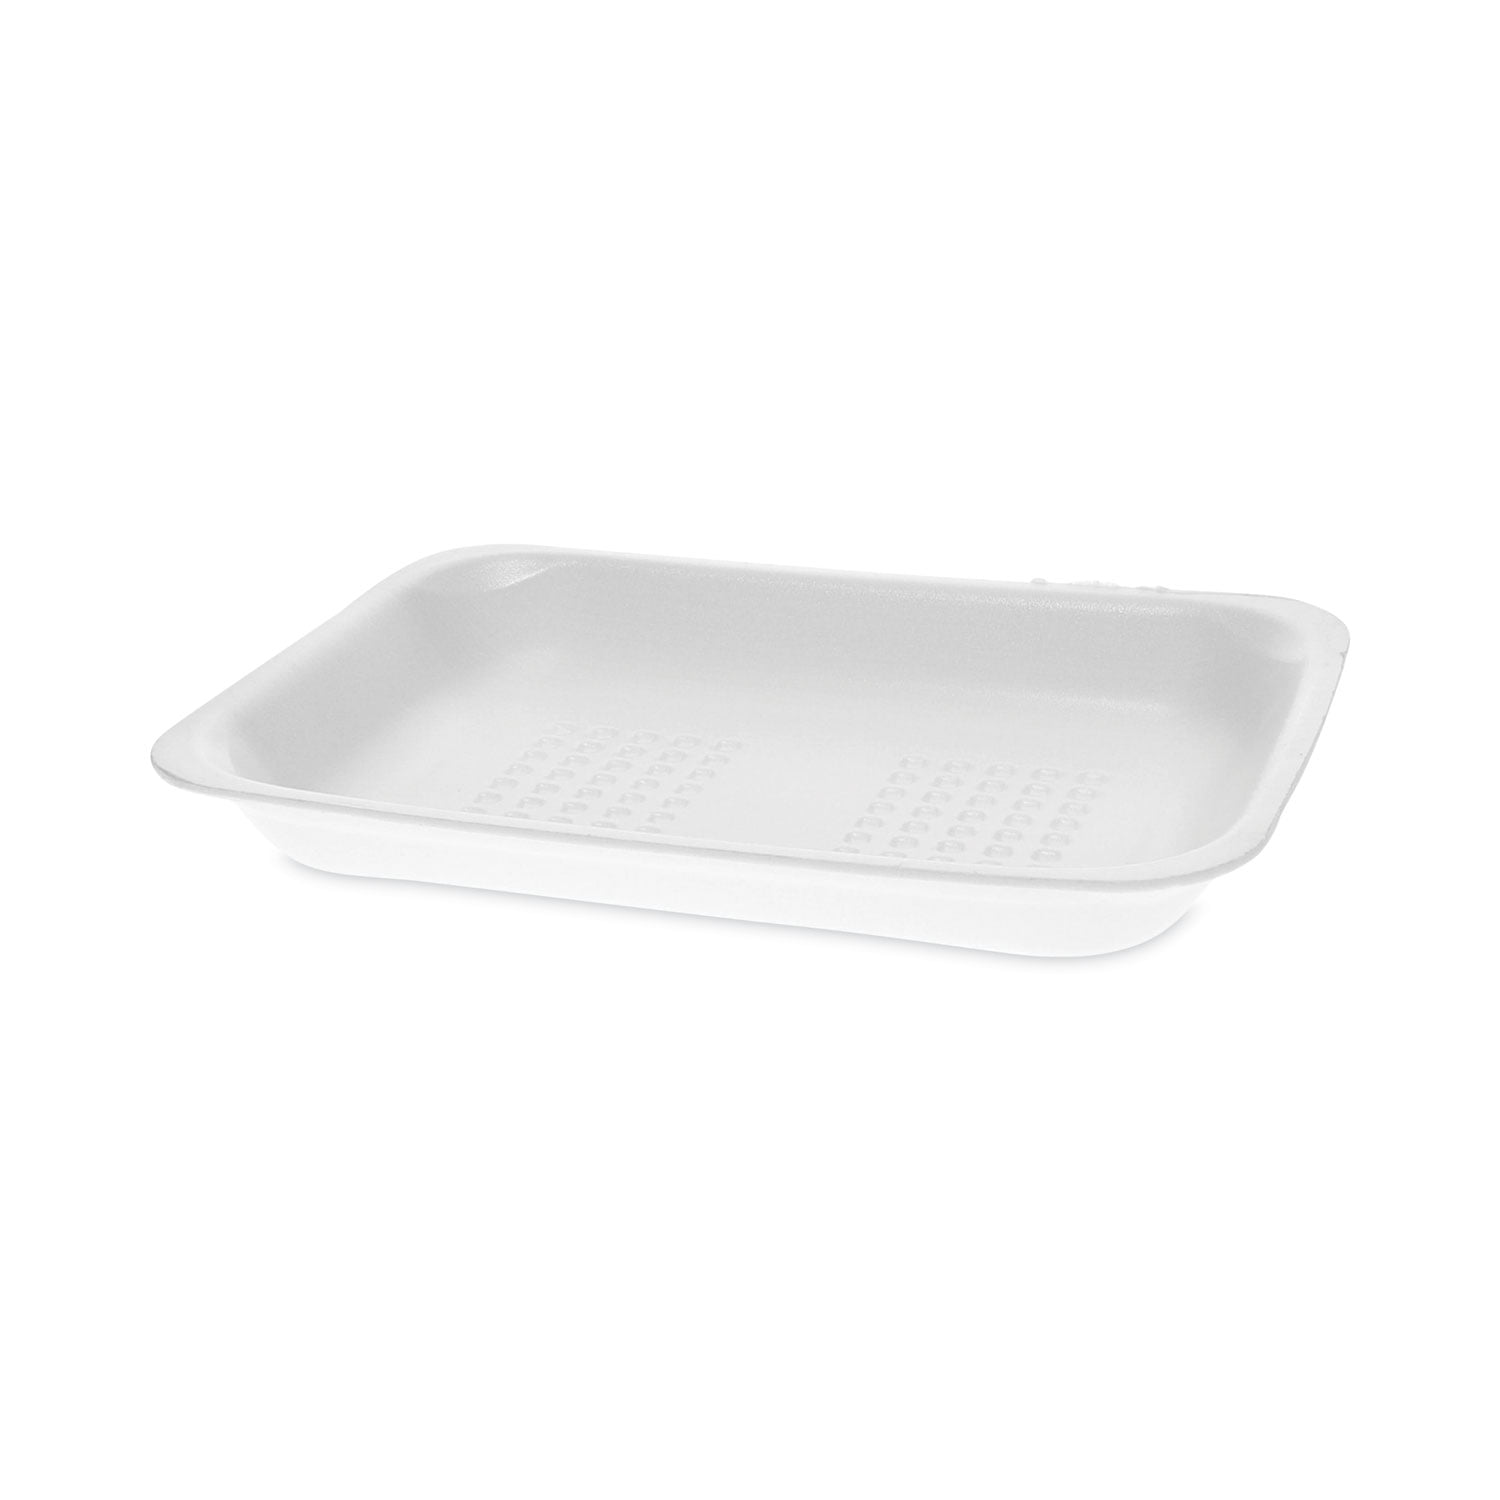 RIKICACA White Foam Meat Tray (25pcs/Pack - 8.3 x 5.9 x 1.2) with White  Meat Absorbent Pad, Disposable Standard Supermarket Food Tray